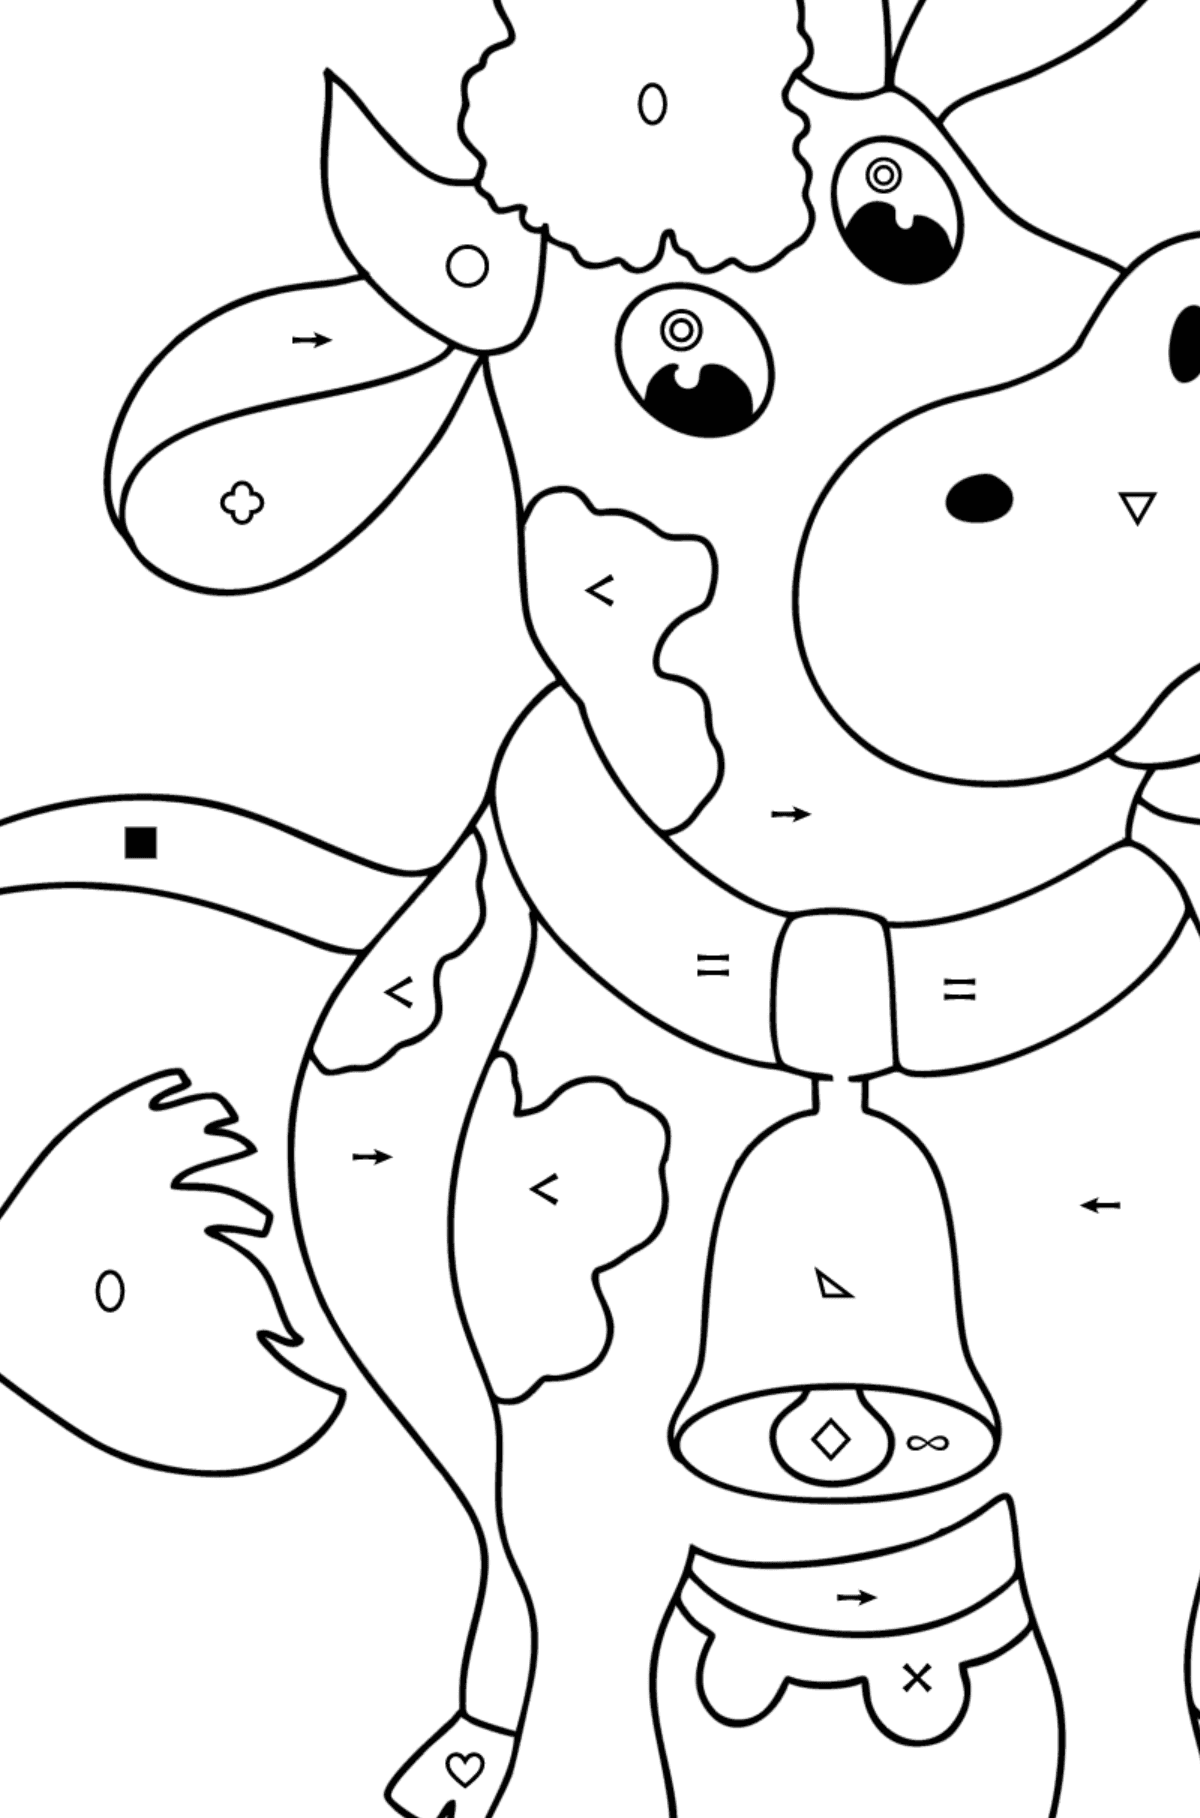 Coloring page cow with a bell - Coloring by Symbols and Geometric Shapes for Kids